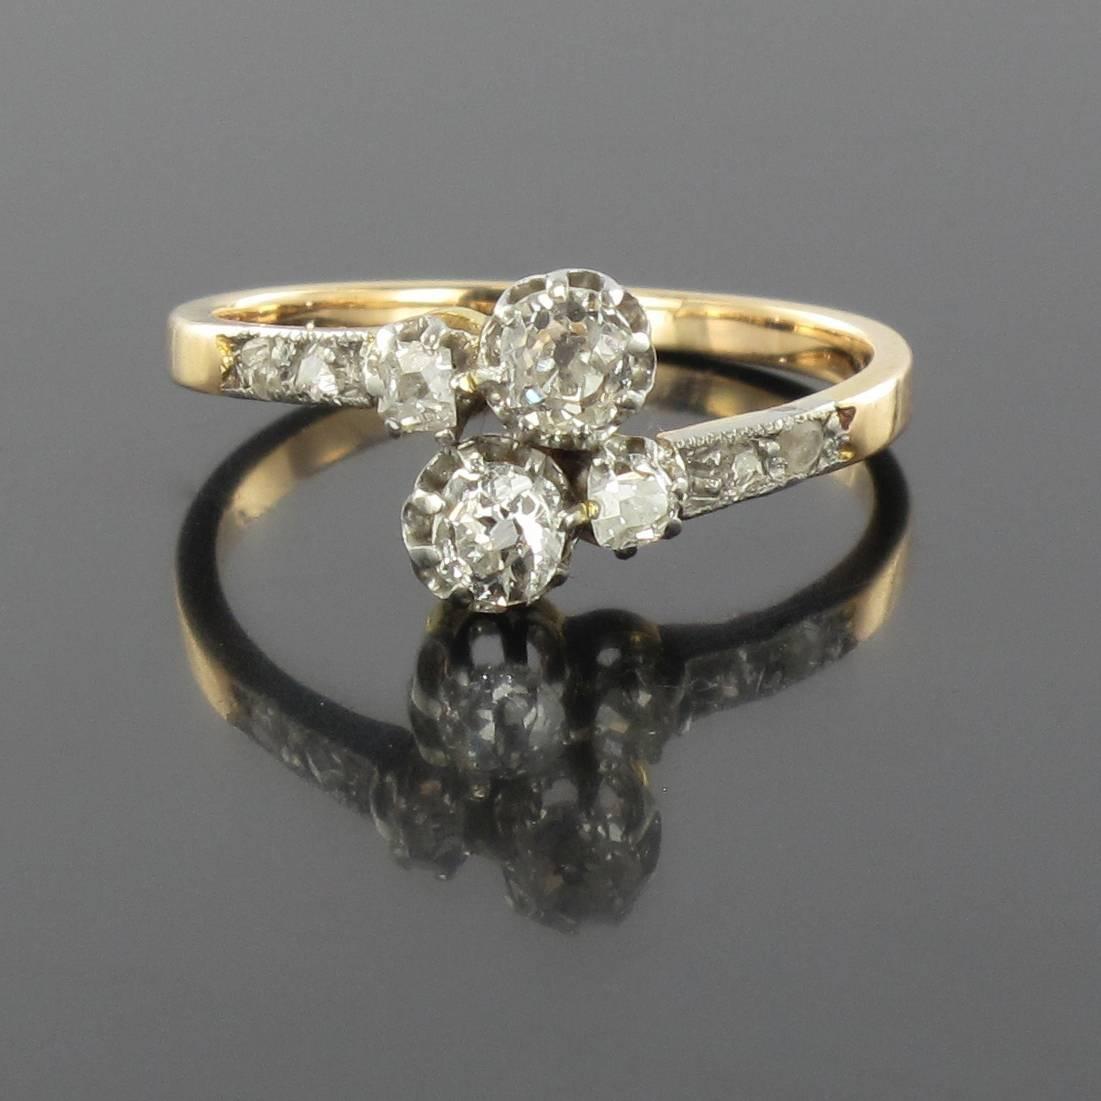 Ring in platinium and 18 carat yellow gold, eagle head hallmark. 

This delicate antique ring could be described as femininity incarnate. This Lovers ring is set with 2 cushion cut diamonds each with another smaller cushion cut diamond alongside.